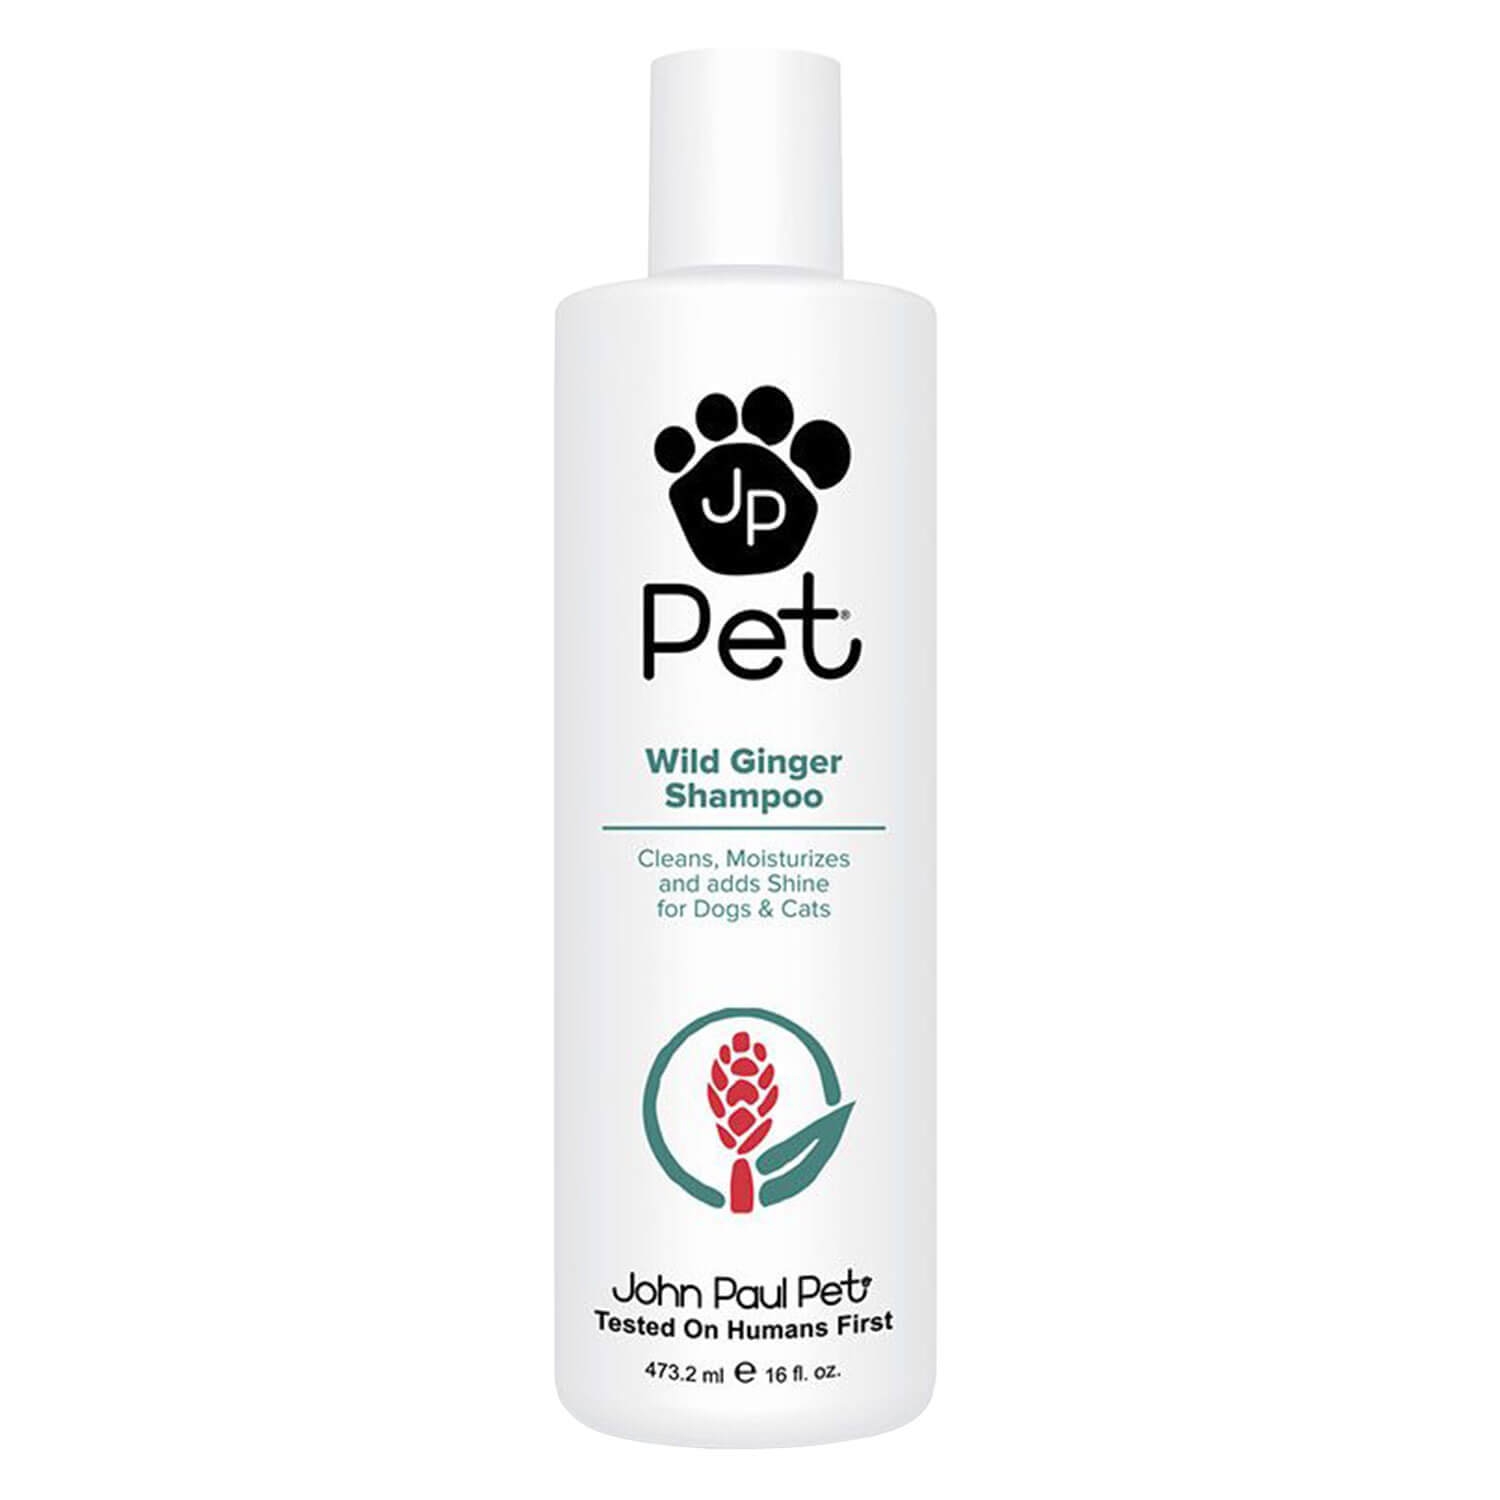 Product image from JP Pet - Wild Ginger Shampoo